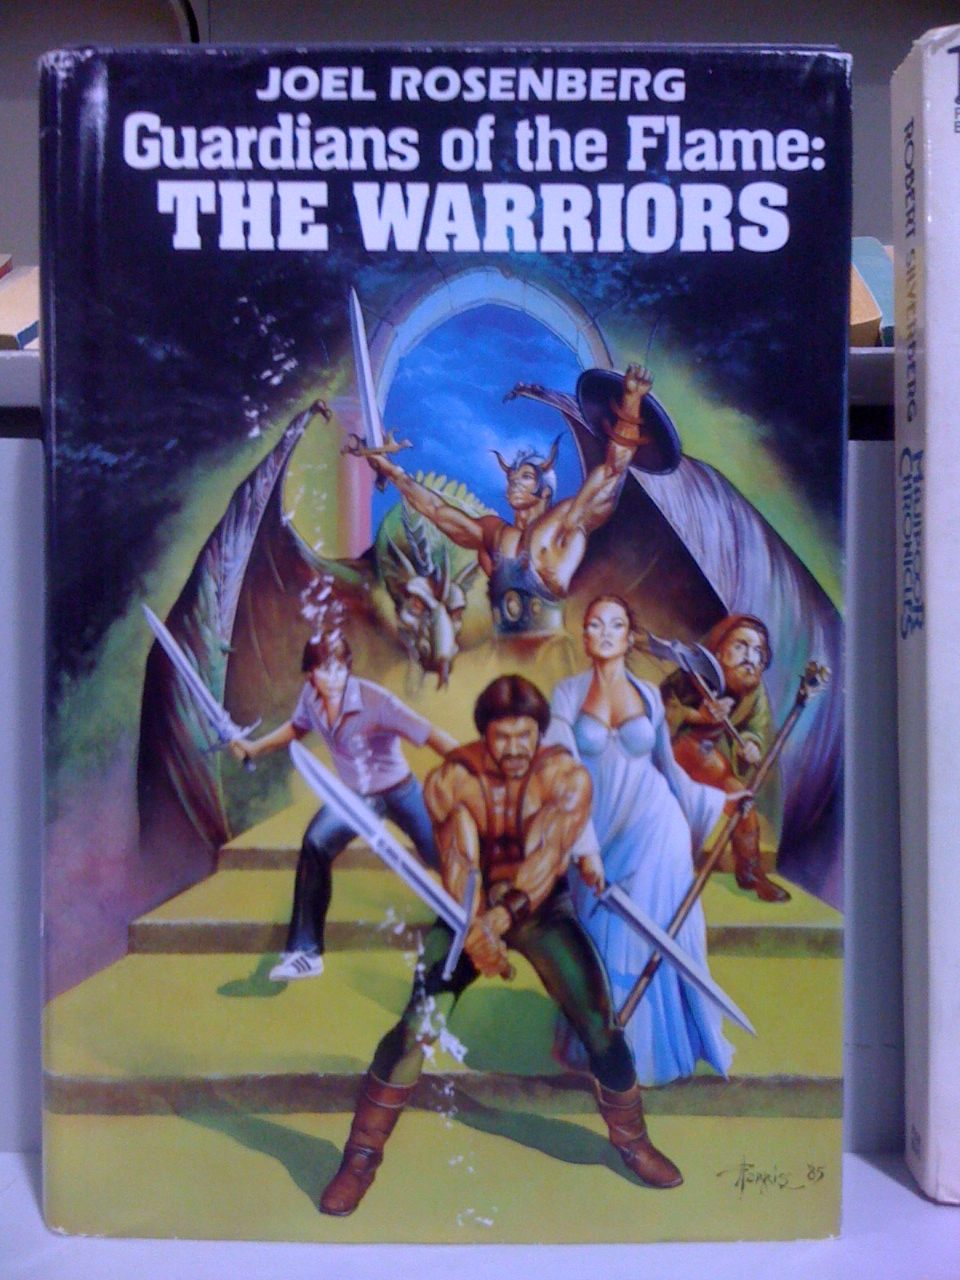 The Warriors! Coming to a local leisure centre near you!